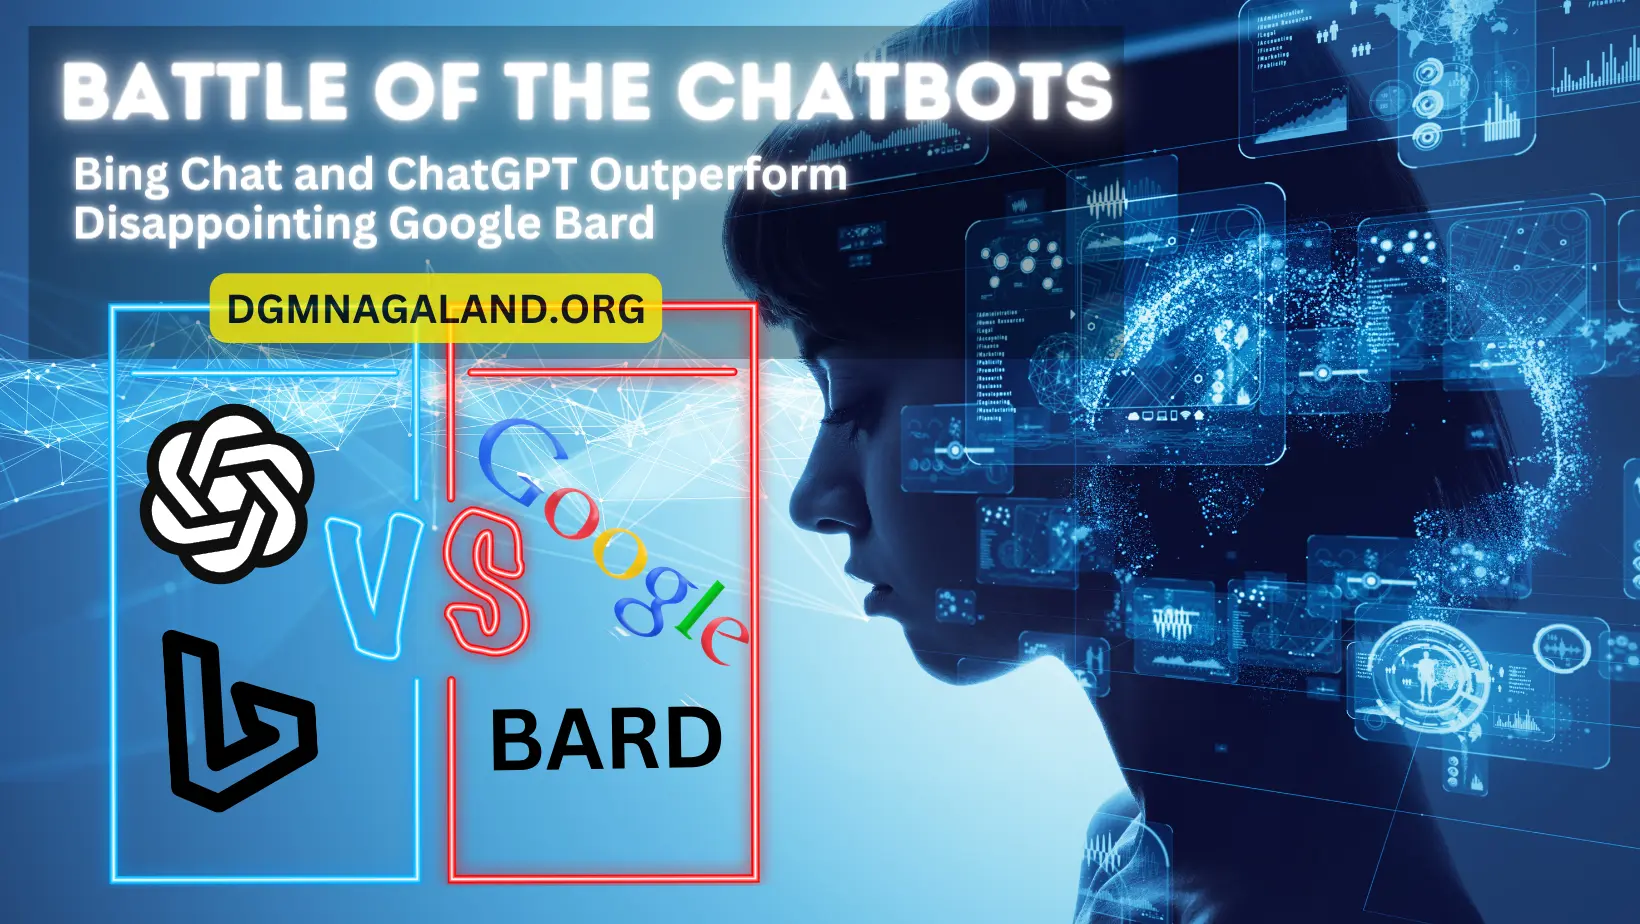 Google Bard Falls Short in Battle of Chatbots: Bing Chat and ChatGPT Reign Supreme with AI Prowess